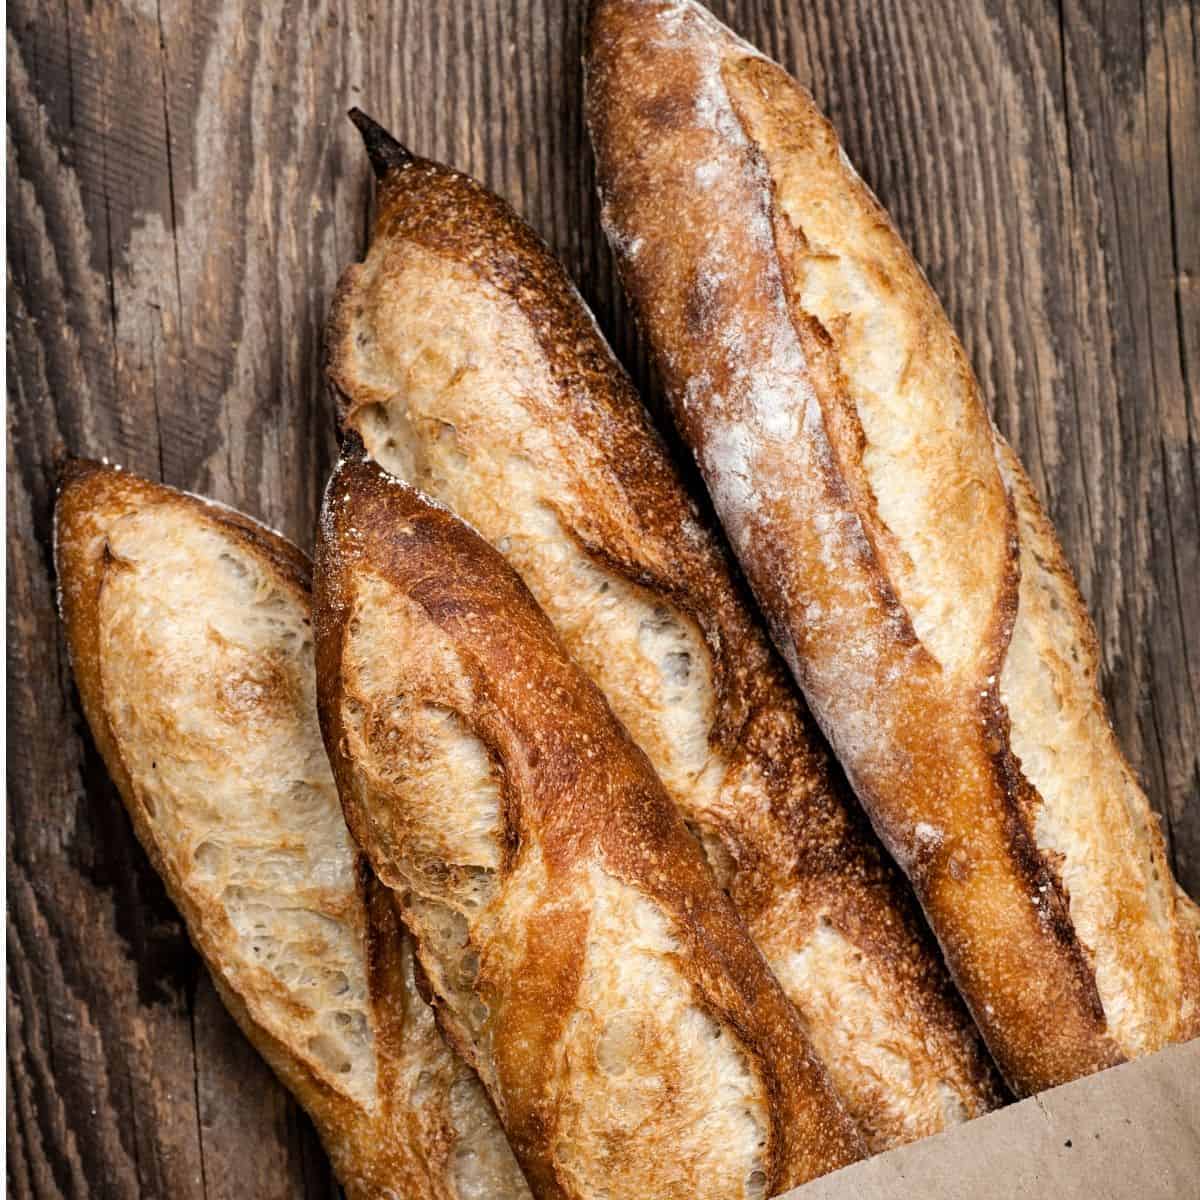 Long French baguettes on table.